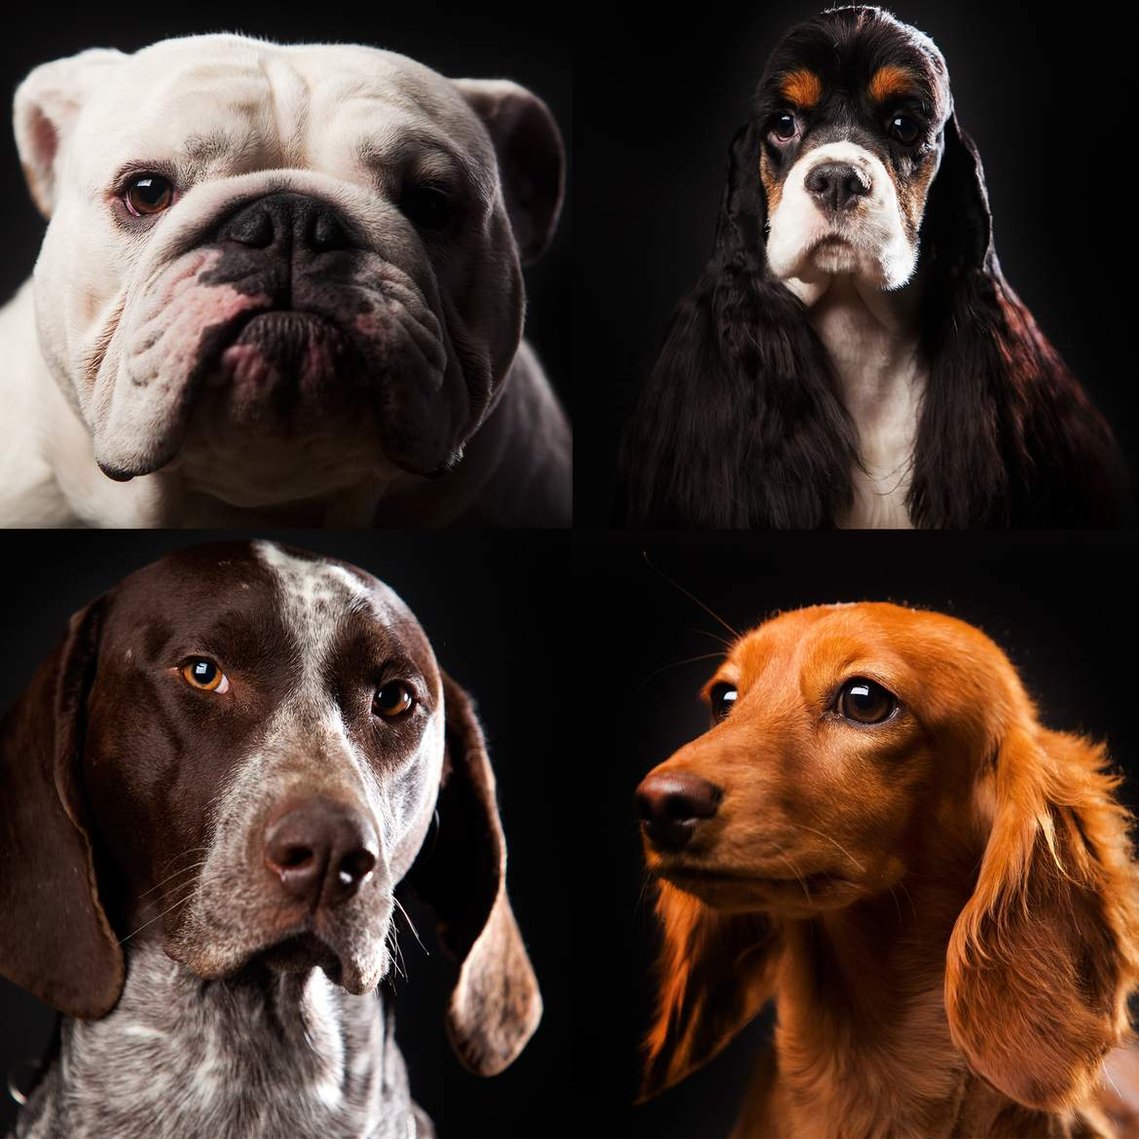 From top left, Bernie, a 1-year-old English bulldog, Ellie, a 2-year-old parti-color cocker spaniel, Lazy Hearts Shining Star, a 3-year-old German shorthaired pointer and Angie, a 7-month-old shirley bastian dachshund pose for portraits.